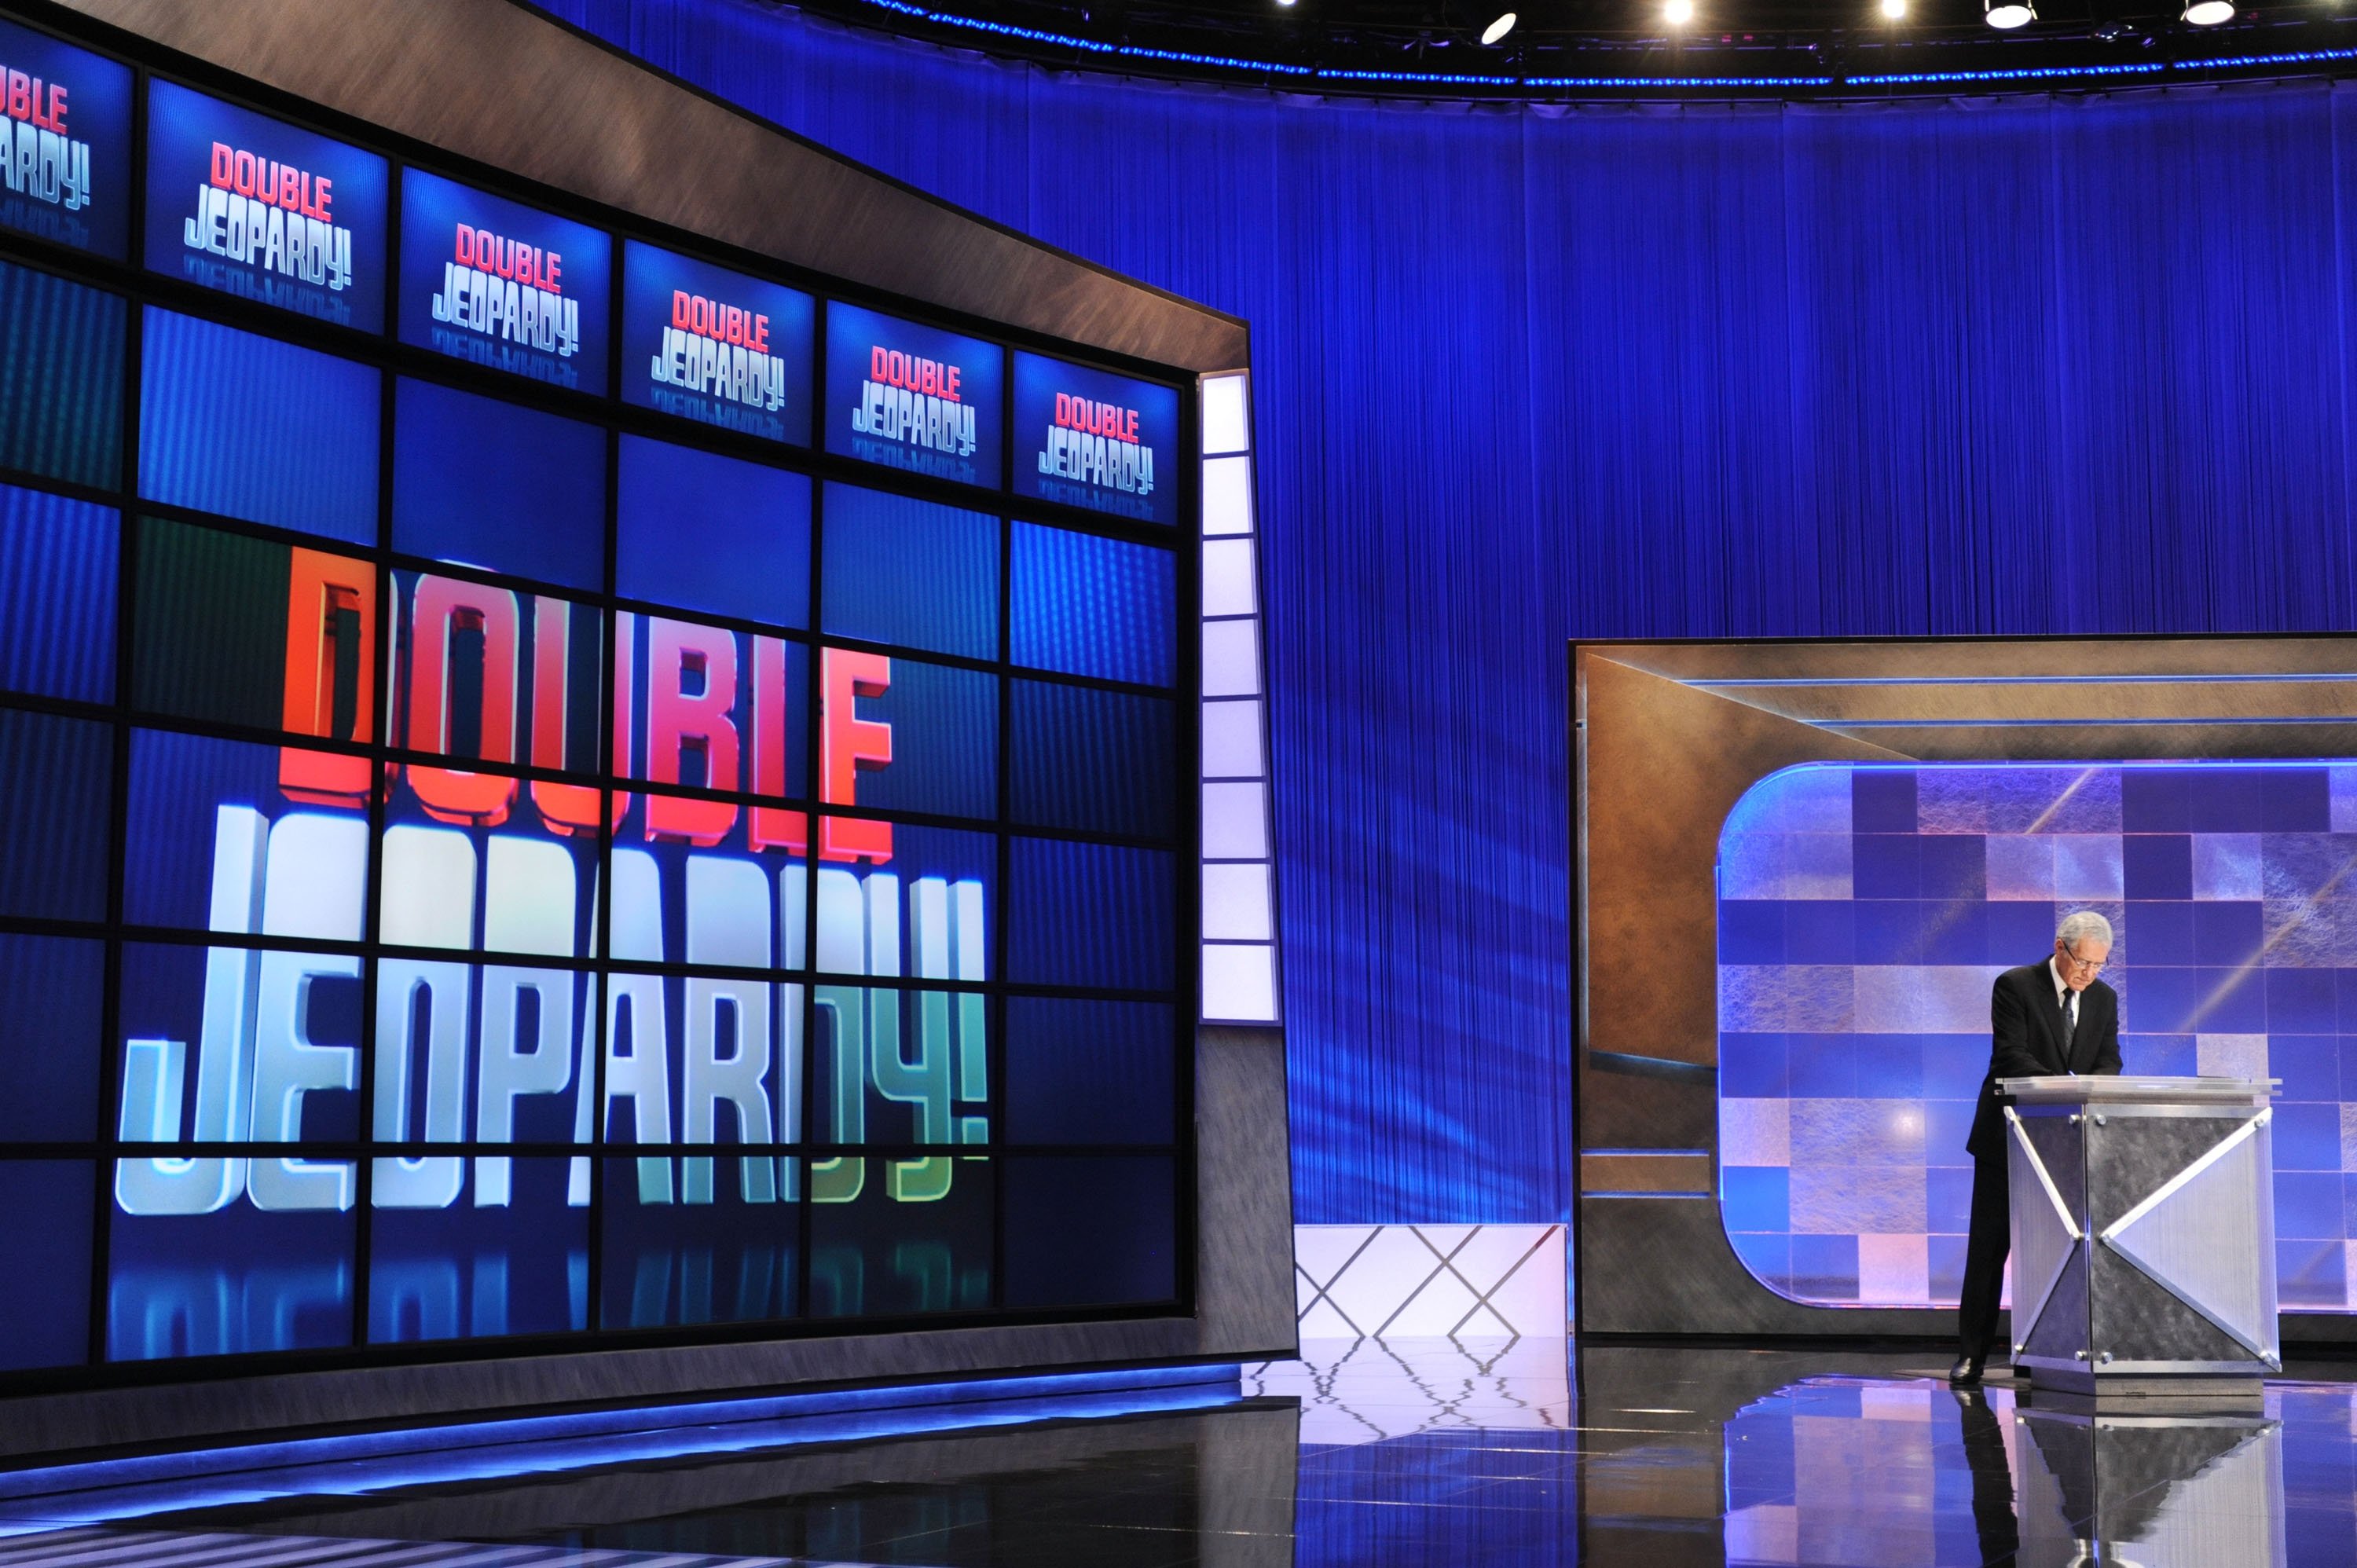 'Jeopardy!' host Alex Trebek rehearses his lines on the game show's set, 2010